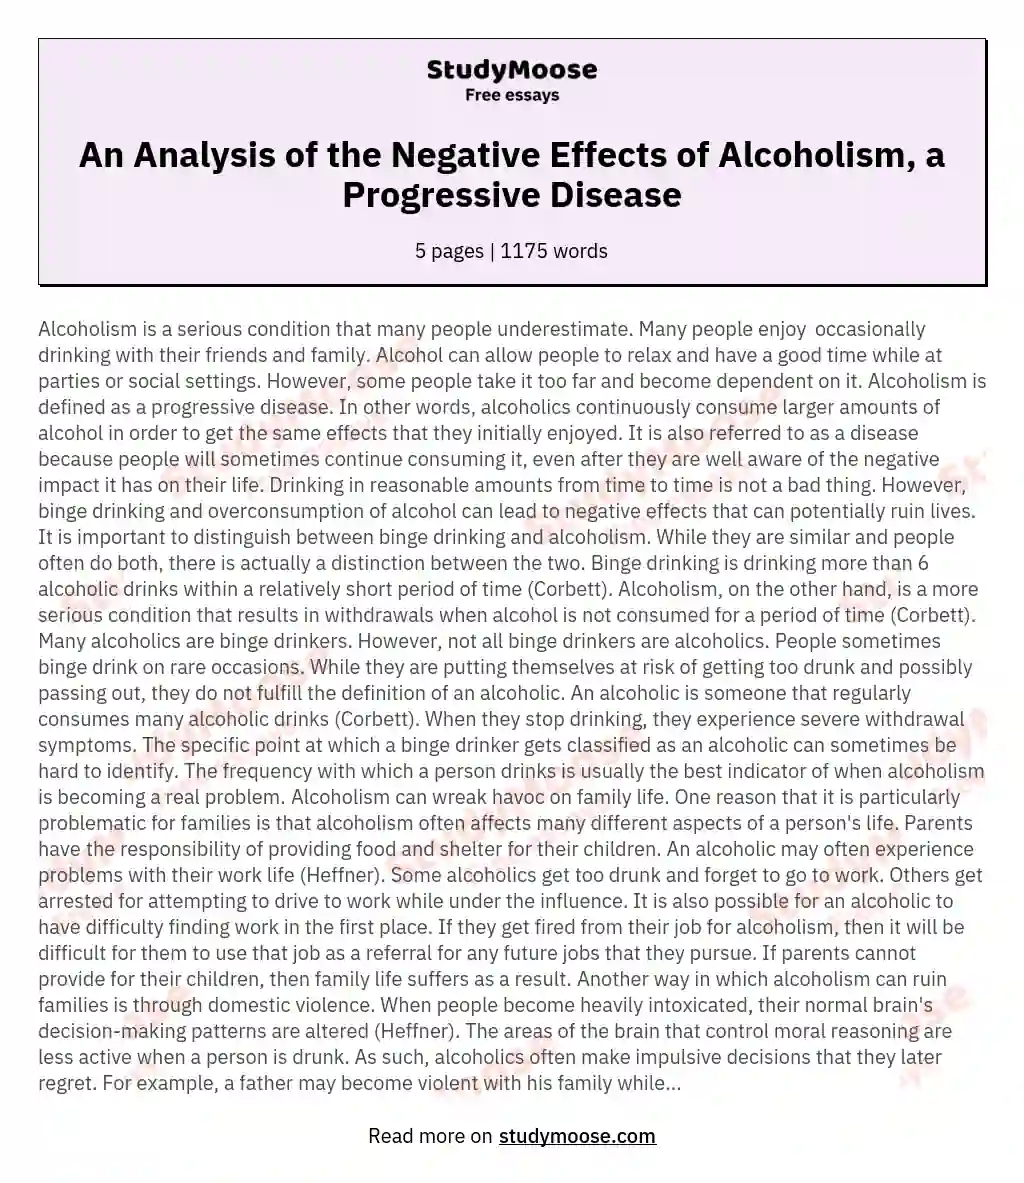 An Analysis of the Negative Effects of Alcoholism, a Progressive Disease essay